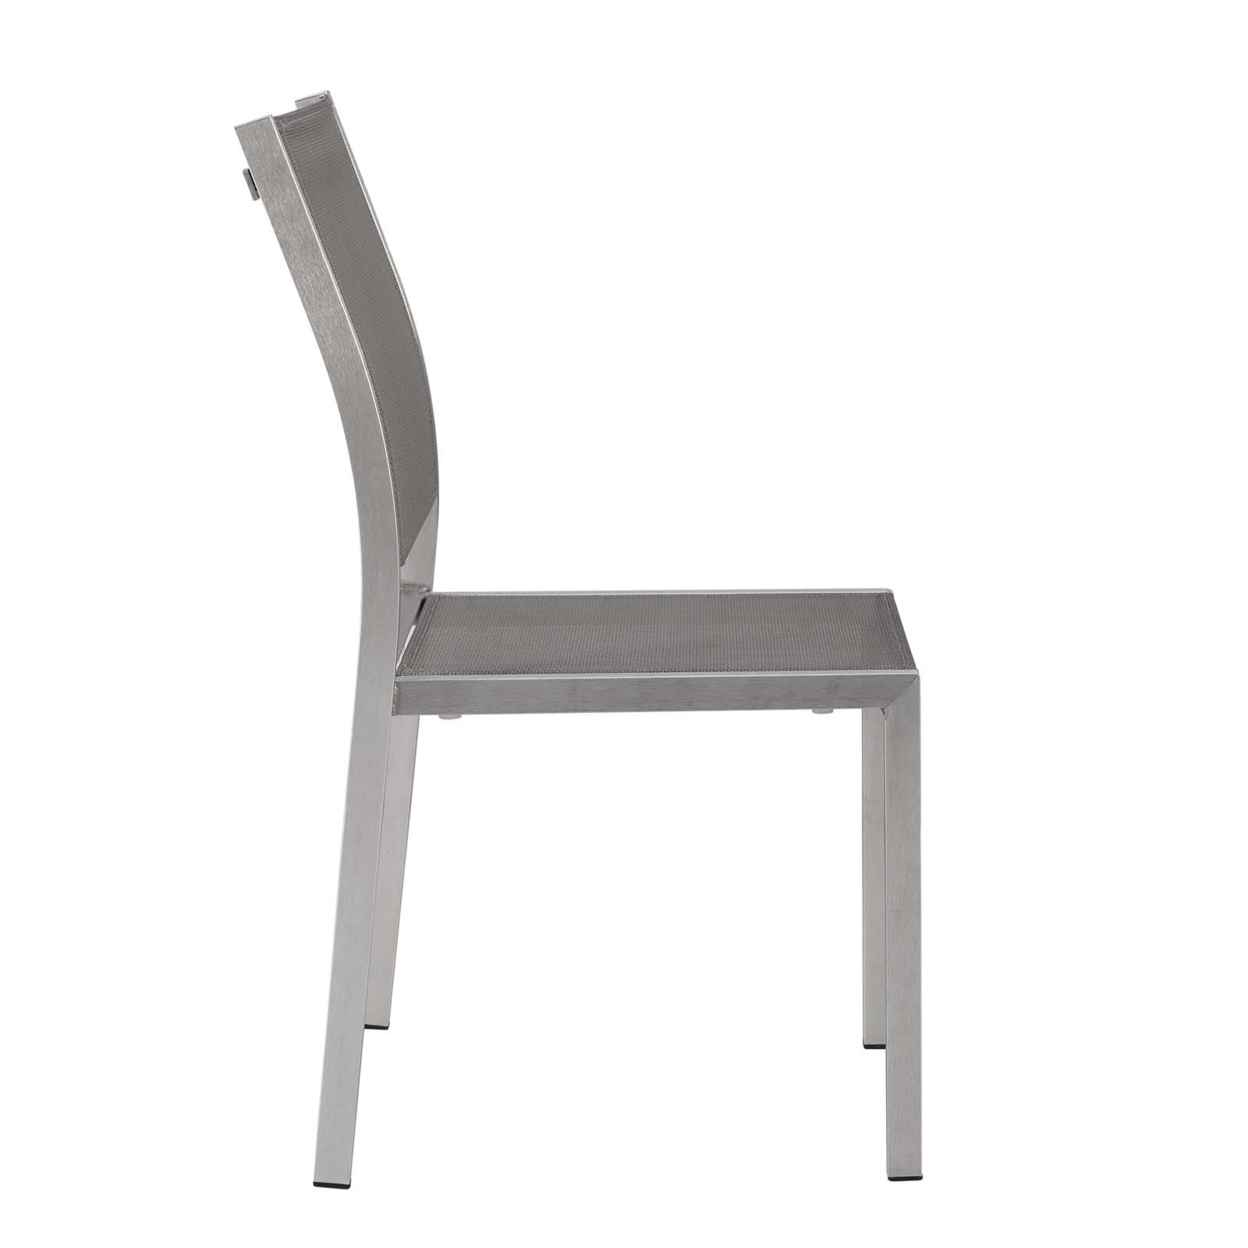 Modway Shore Fabric and Aluminum Outdoor Patio Dining Side Chair in Silver/Gray - image 2 of 4